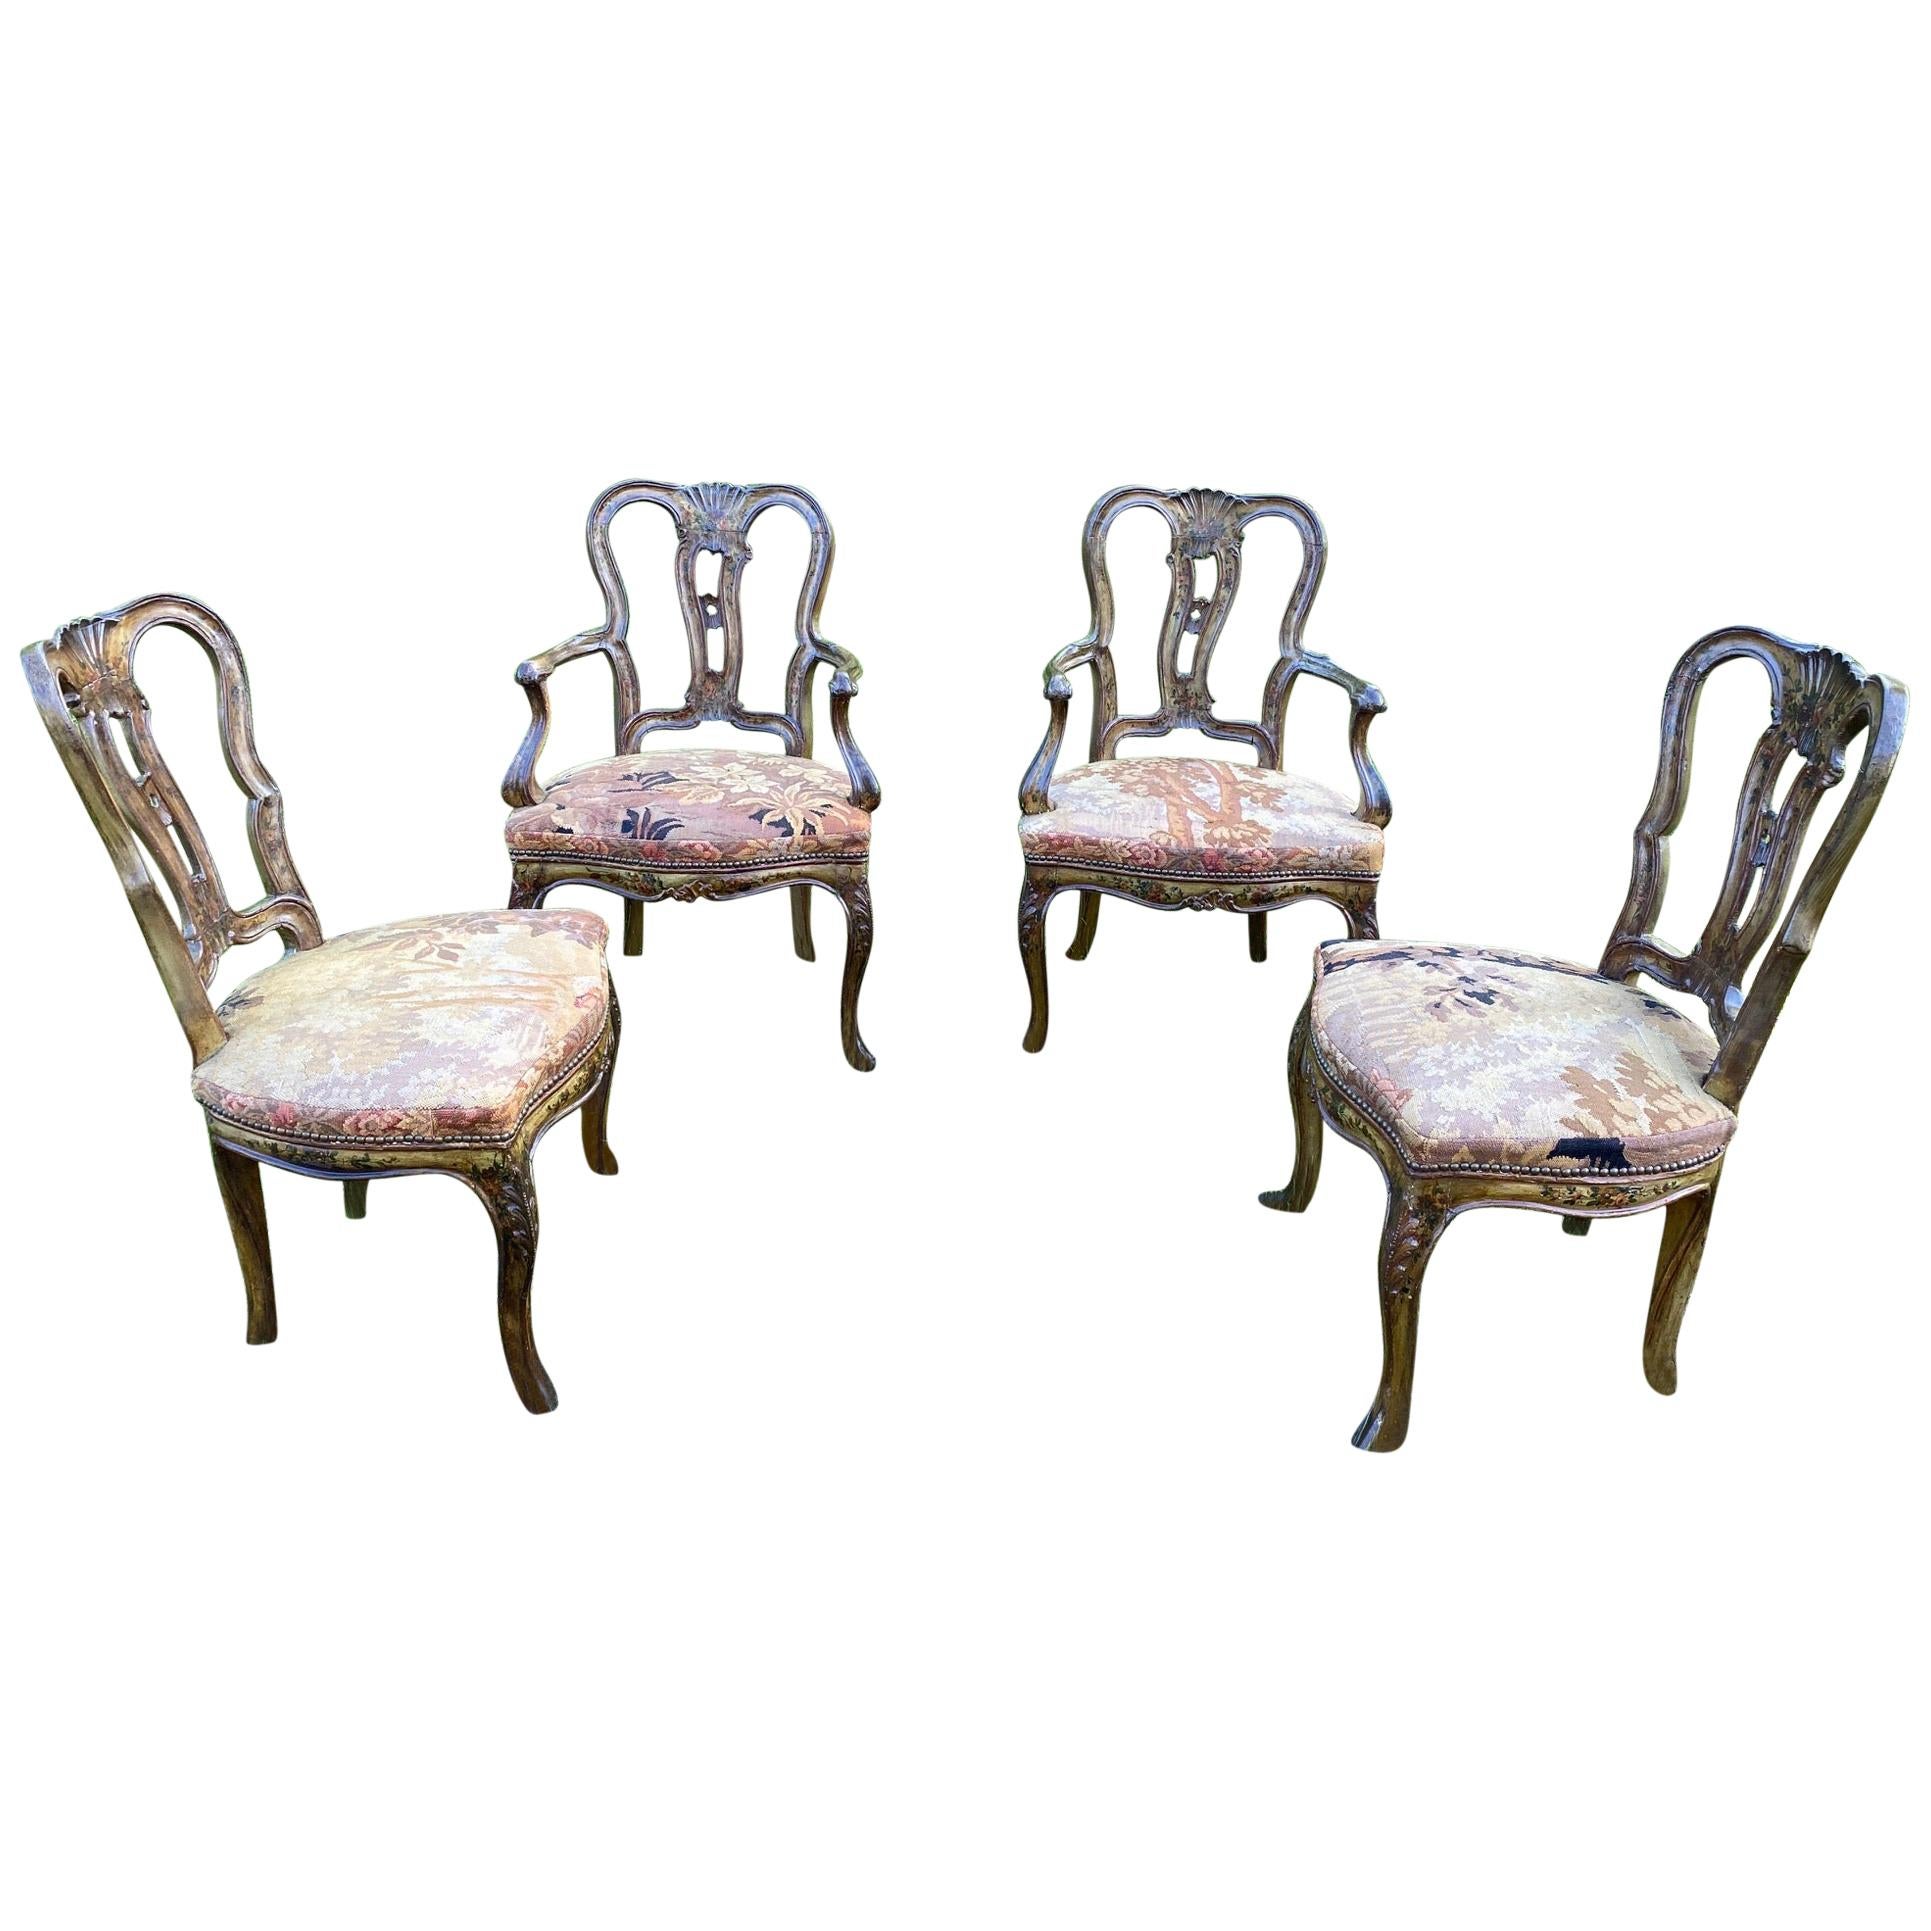 Sumptuous Set of 4 Venetian Hand Painted Dining Chairs with Tapestry Seats